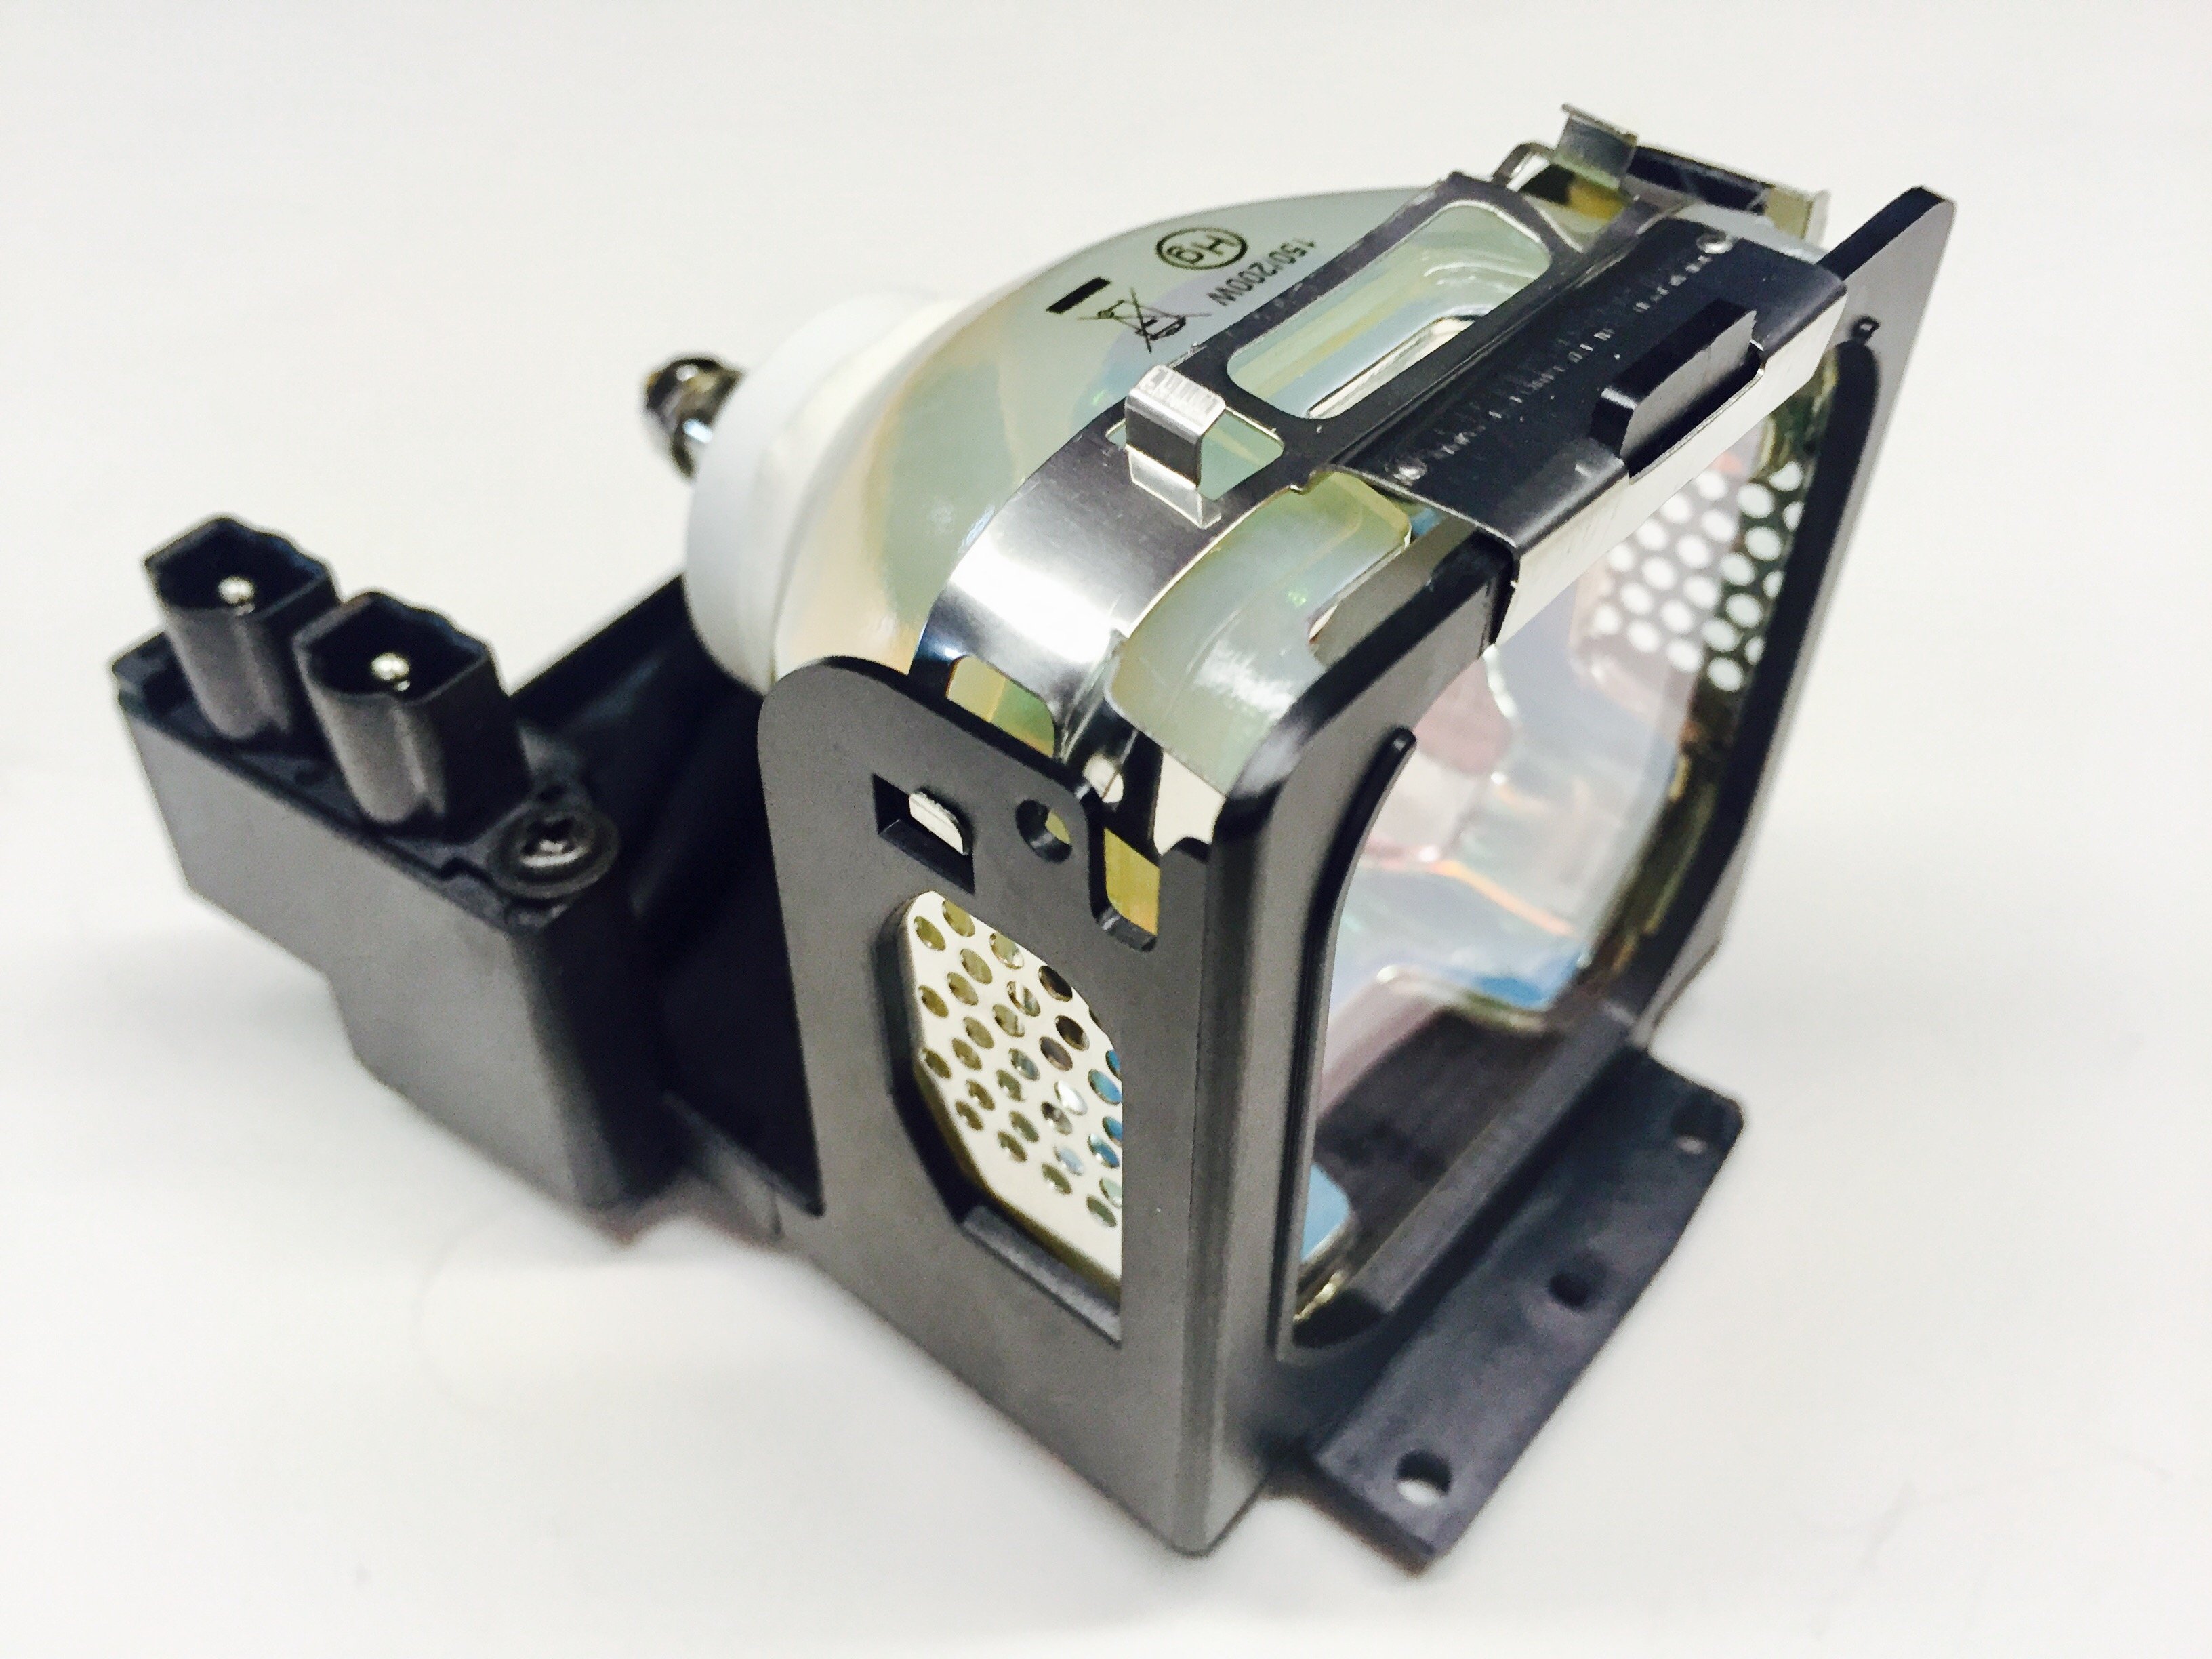 OEM 610-300-7267 Replacement Lamp & Housing for Boxlight Projectors - image 1 of 7